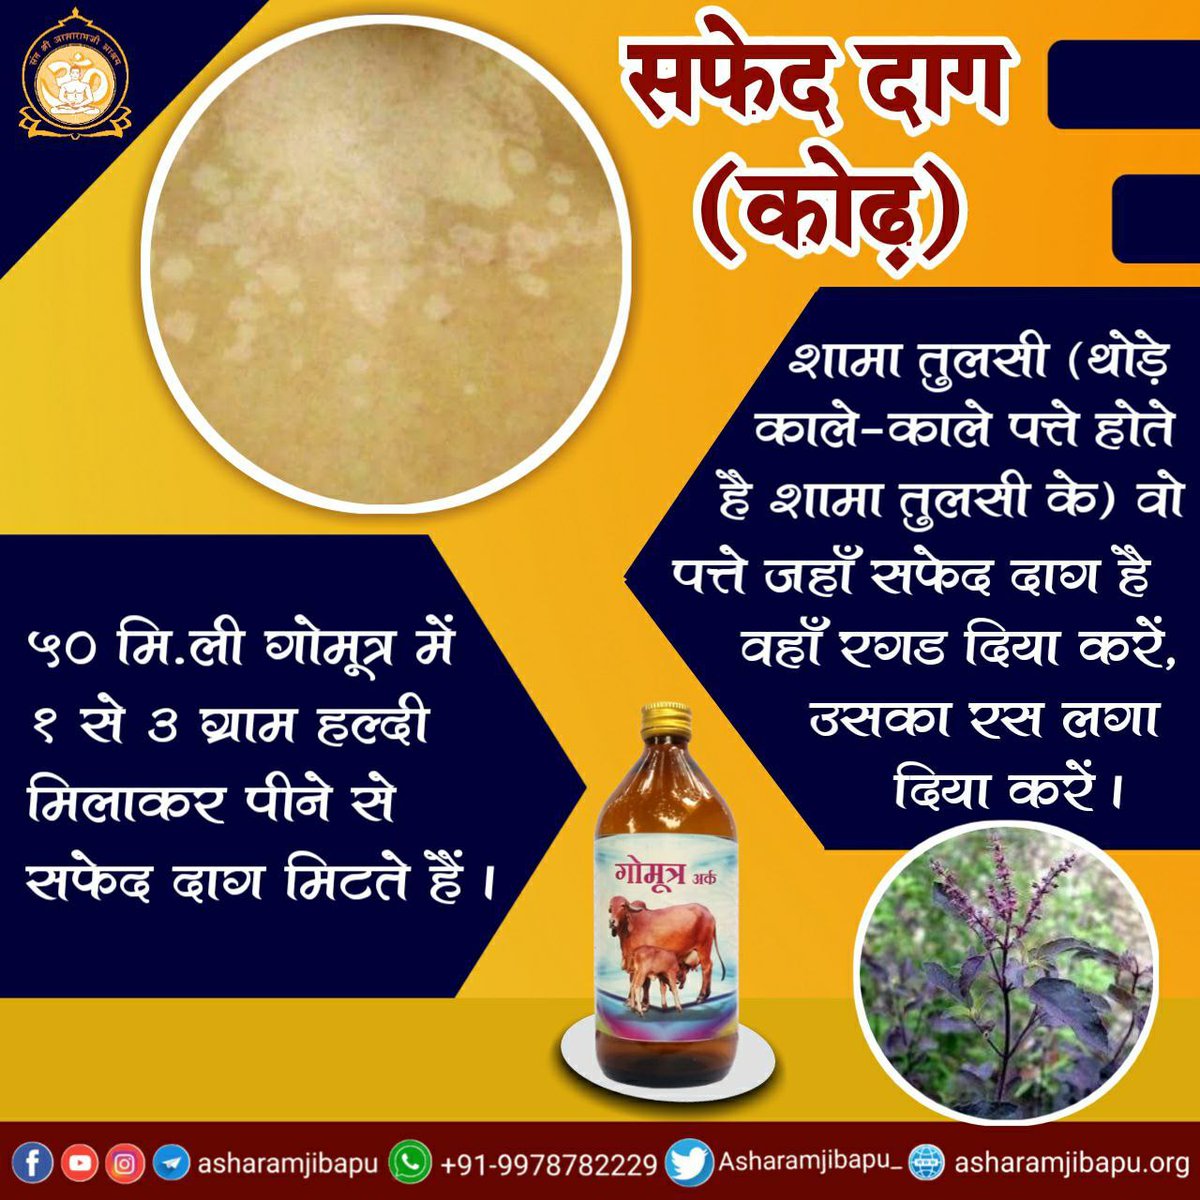 Sant Shri Asharamji Bapu tells in his discourses about  how to attain Wellness Journey by Healthy Living .
For those having white spots- 
Apply leaves of Shyama breed Basil leaves & one can take 50 ml Gaumootra mixed with 1-3 g of turmeric, helps to vanish spots.
#आयुर्वेदामृत